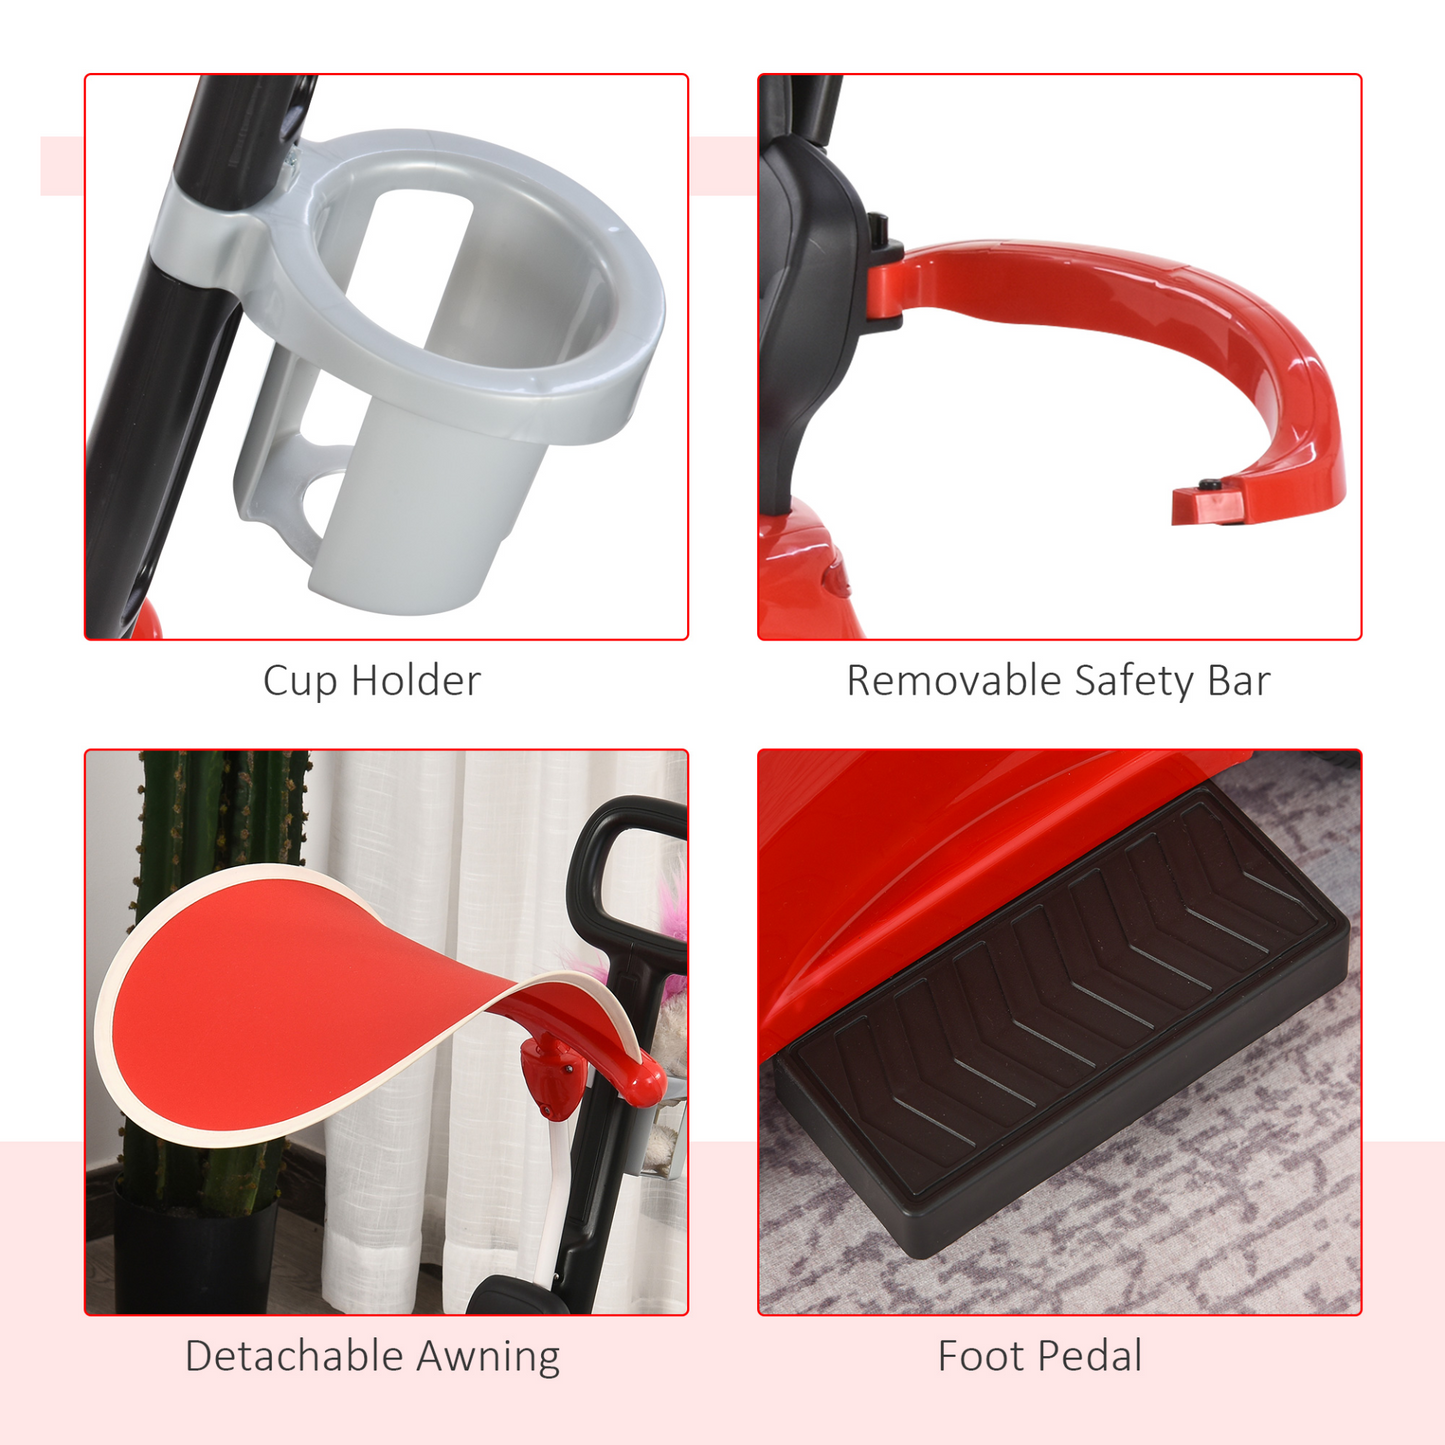 HOMCOM Compatible for 3 in 1 Ride on Push Car for Toddlers Pushcar Sliding Walking Car with Sun Canopy Horn Sound Safety Bar Cup Holder Toy for 1-3 Years Old Kids Red